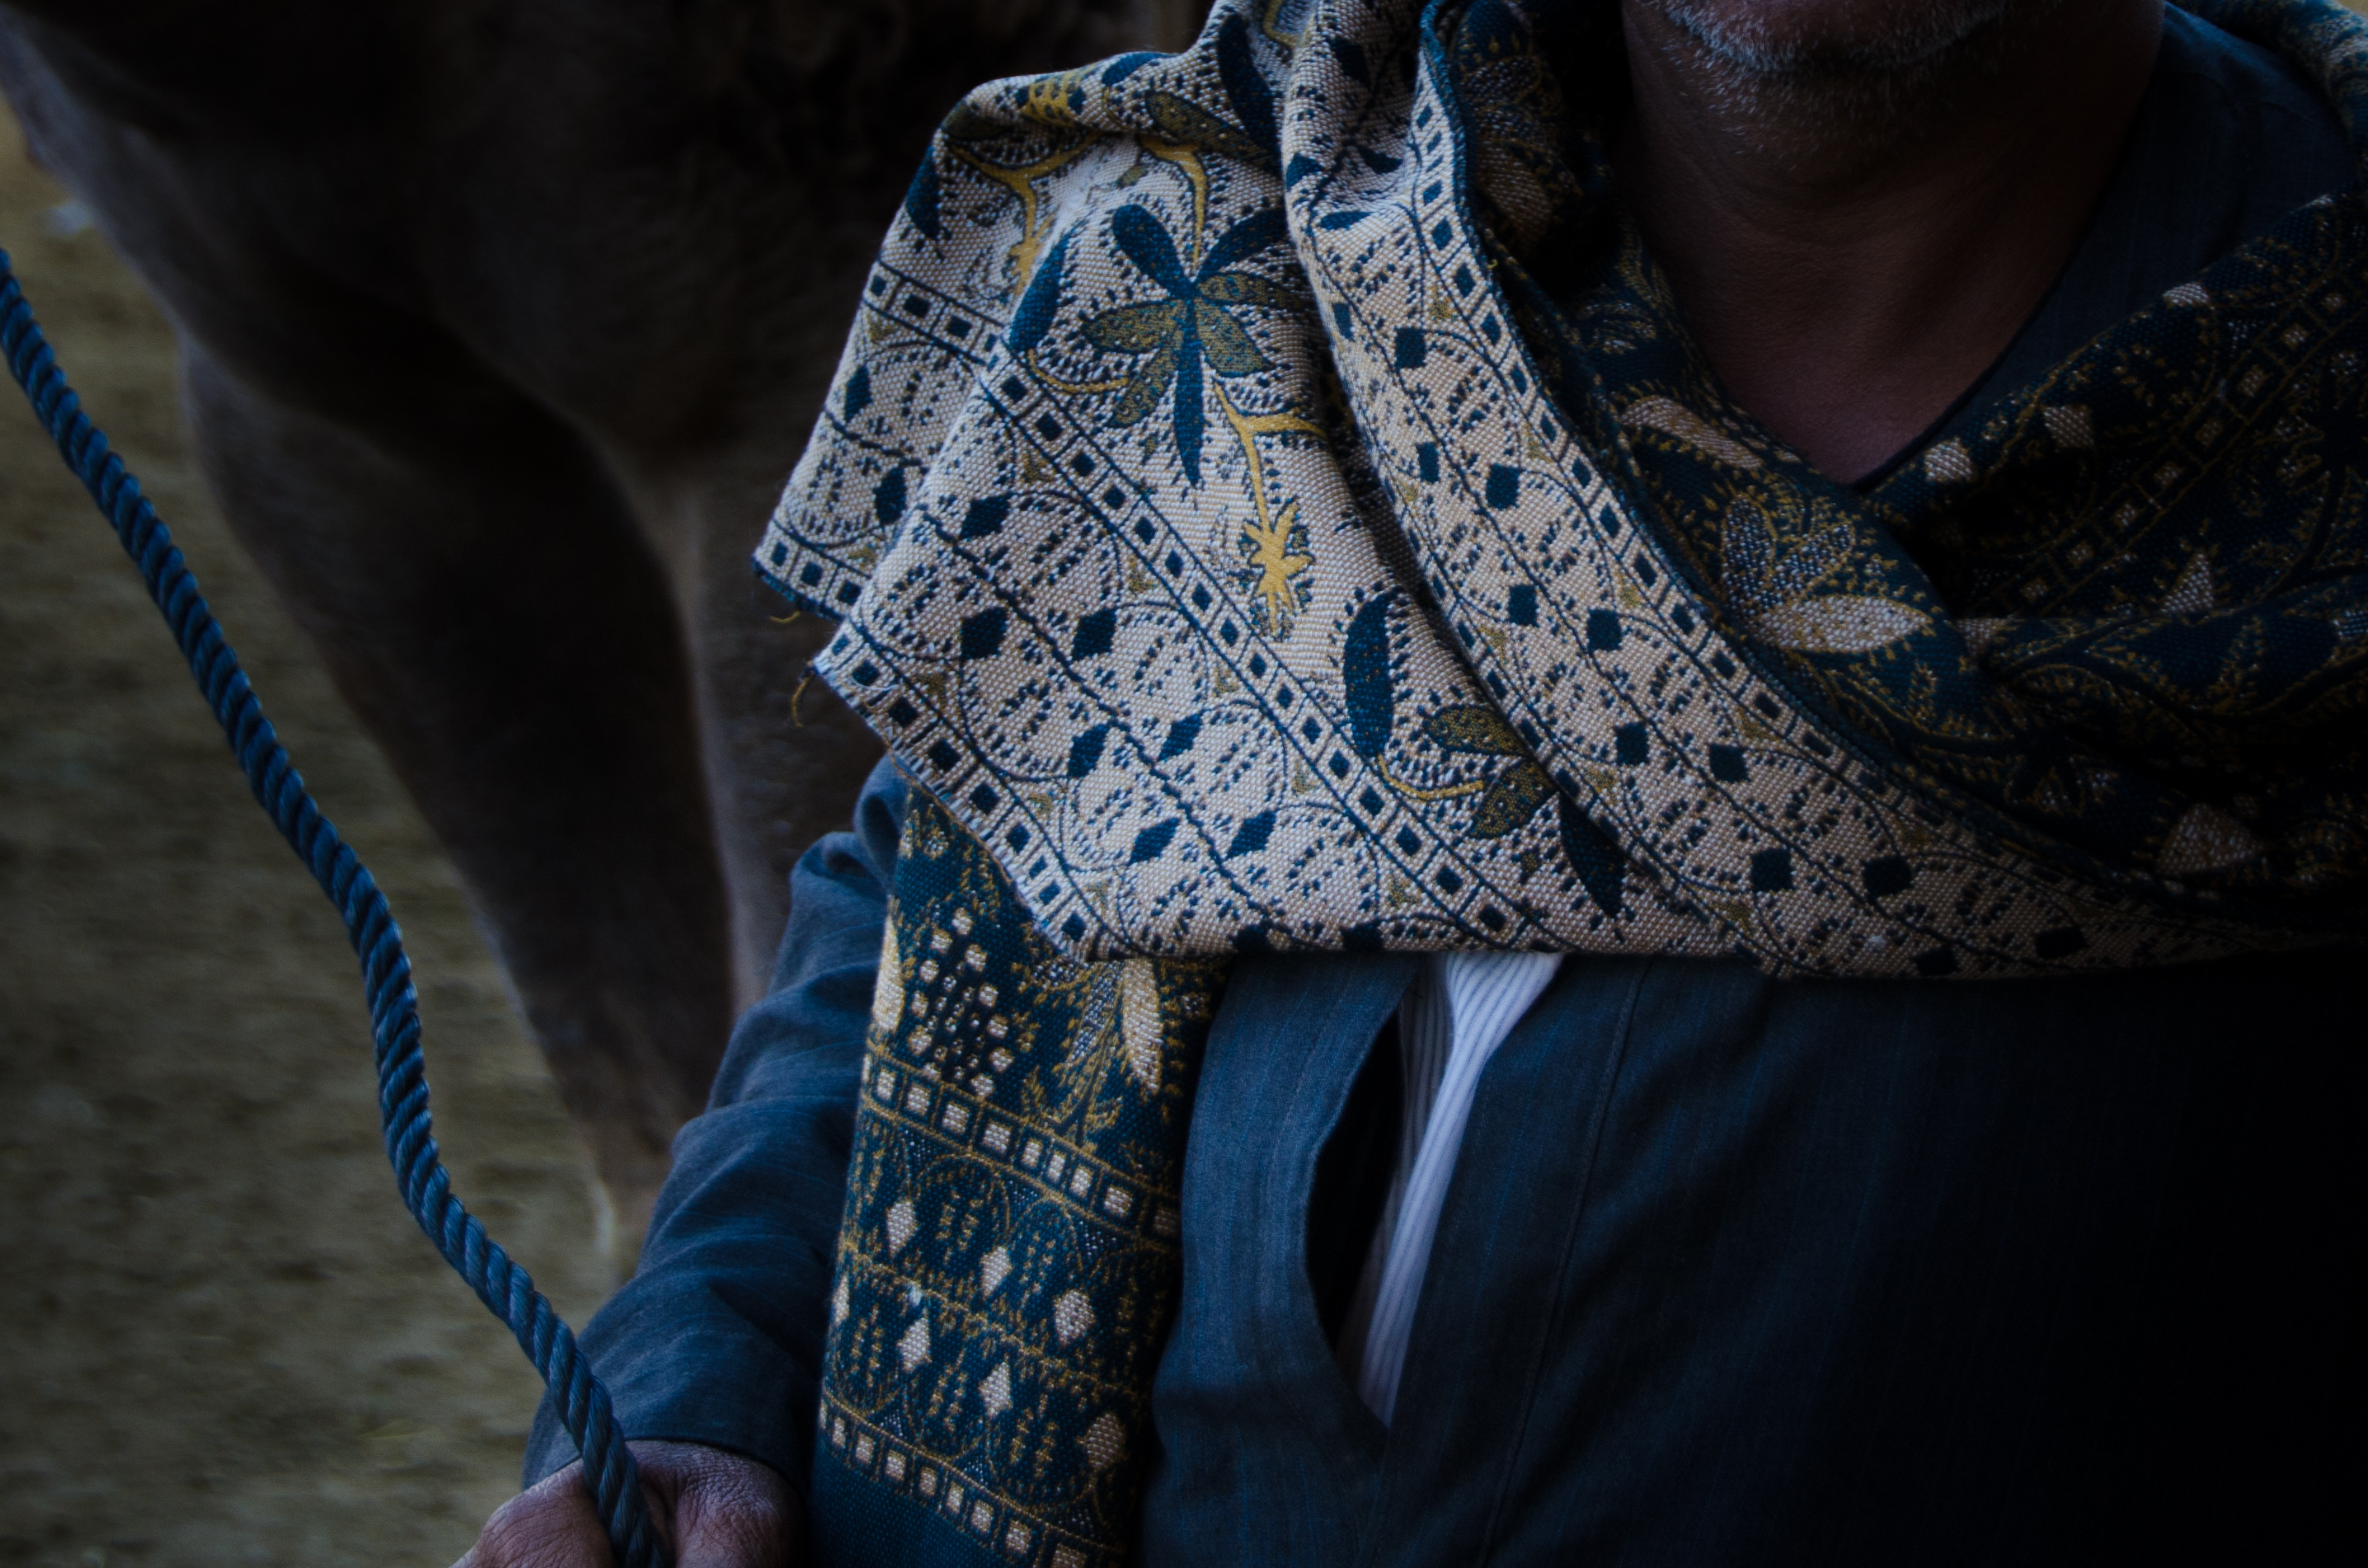 Both man and beast wear tradition around their neck in Birqash. The harsh climate, limited resources and need to provide for a family mean that learning the trade takes precedence over questioning norms of the industry and norms of identity.